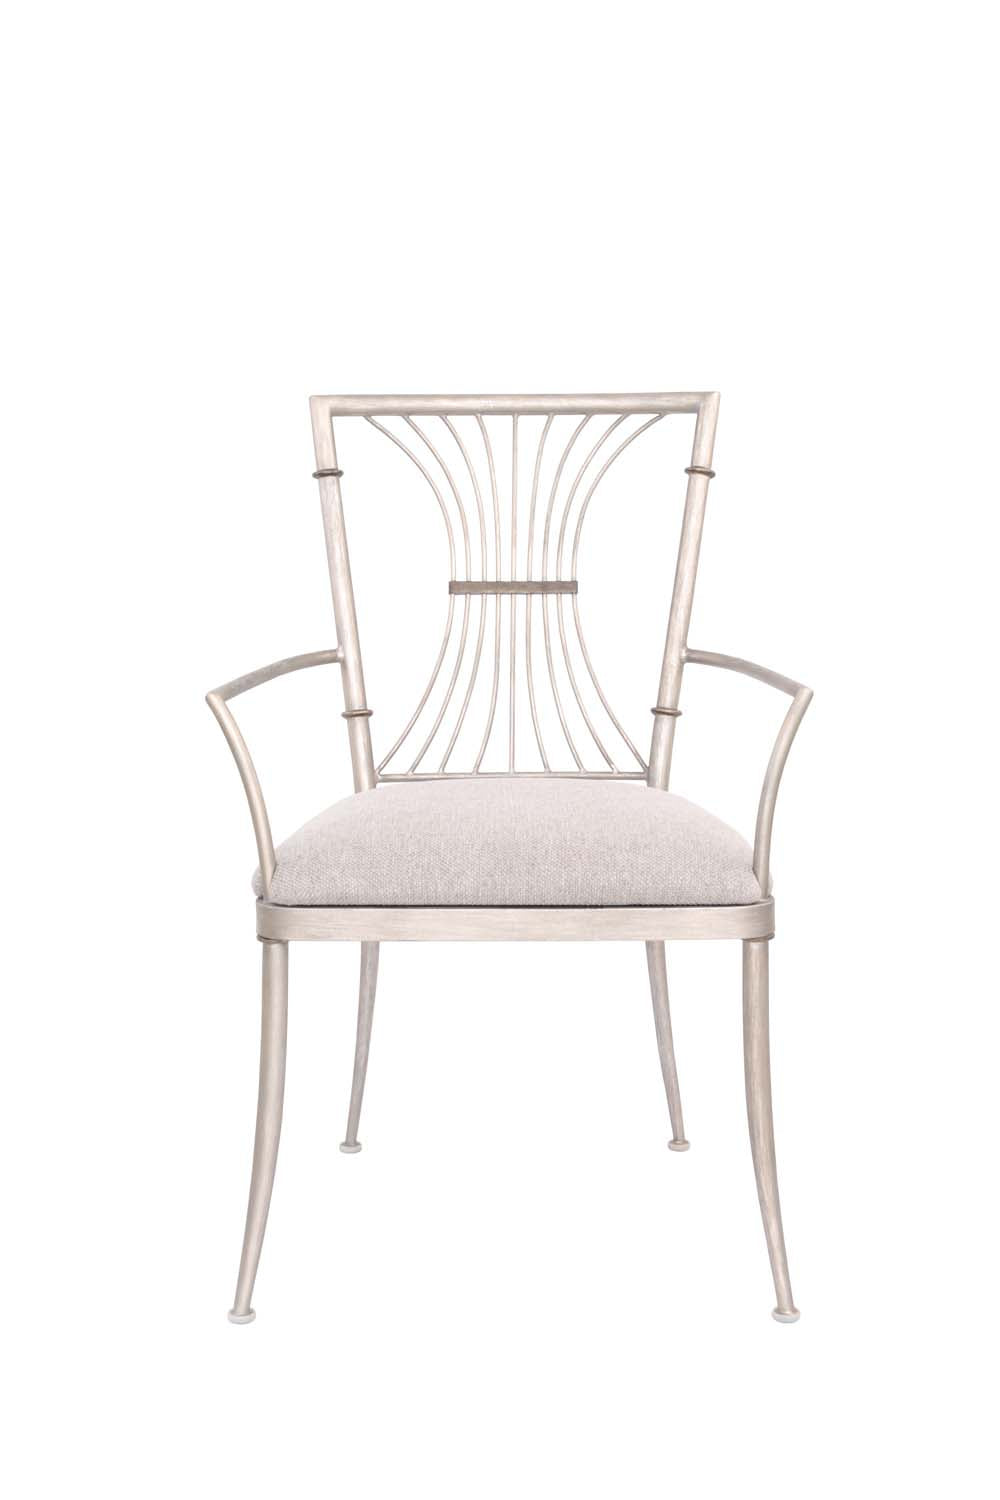 Kalco - 800101PS - Dining Chair - Bal Harbour